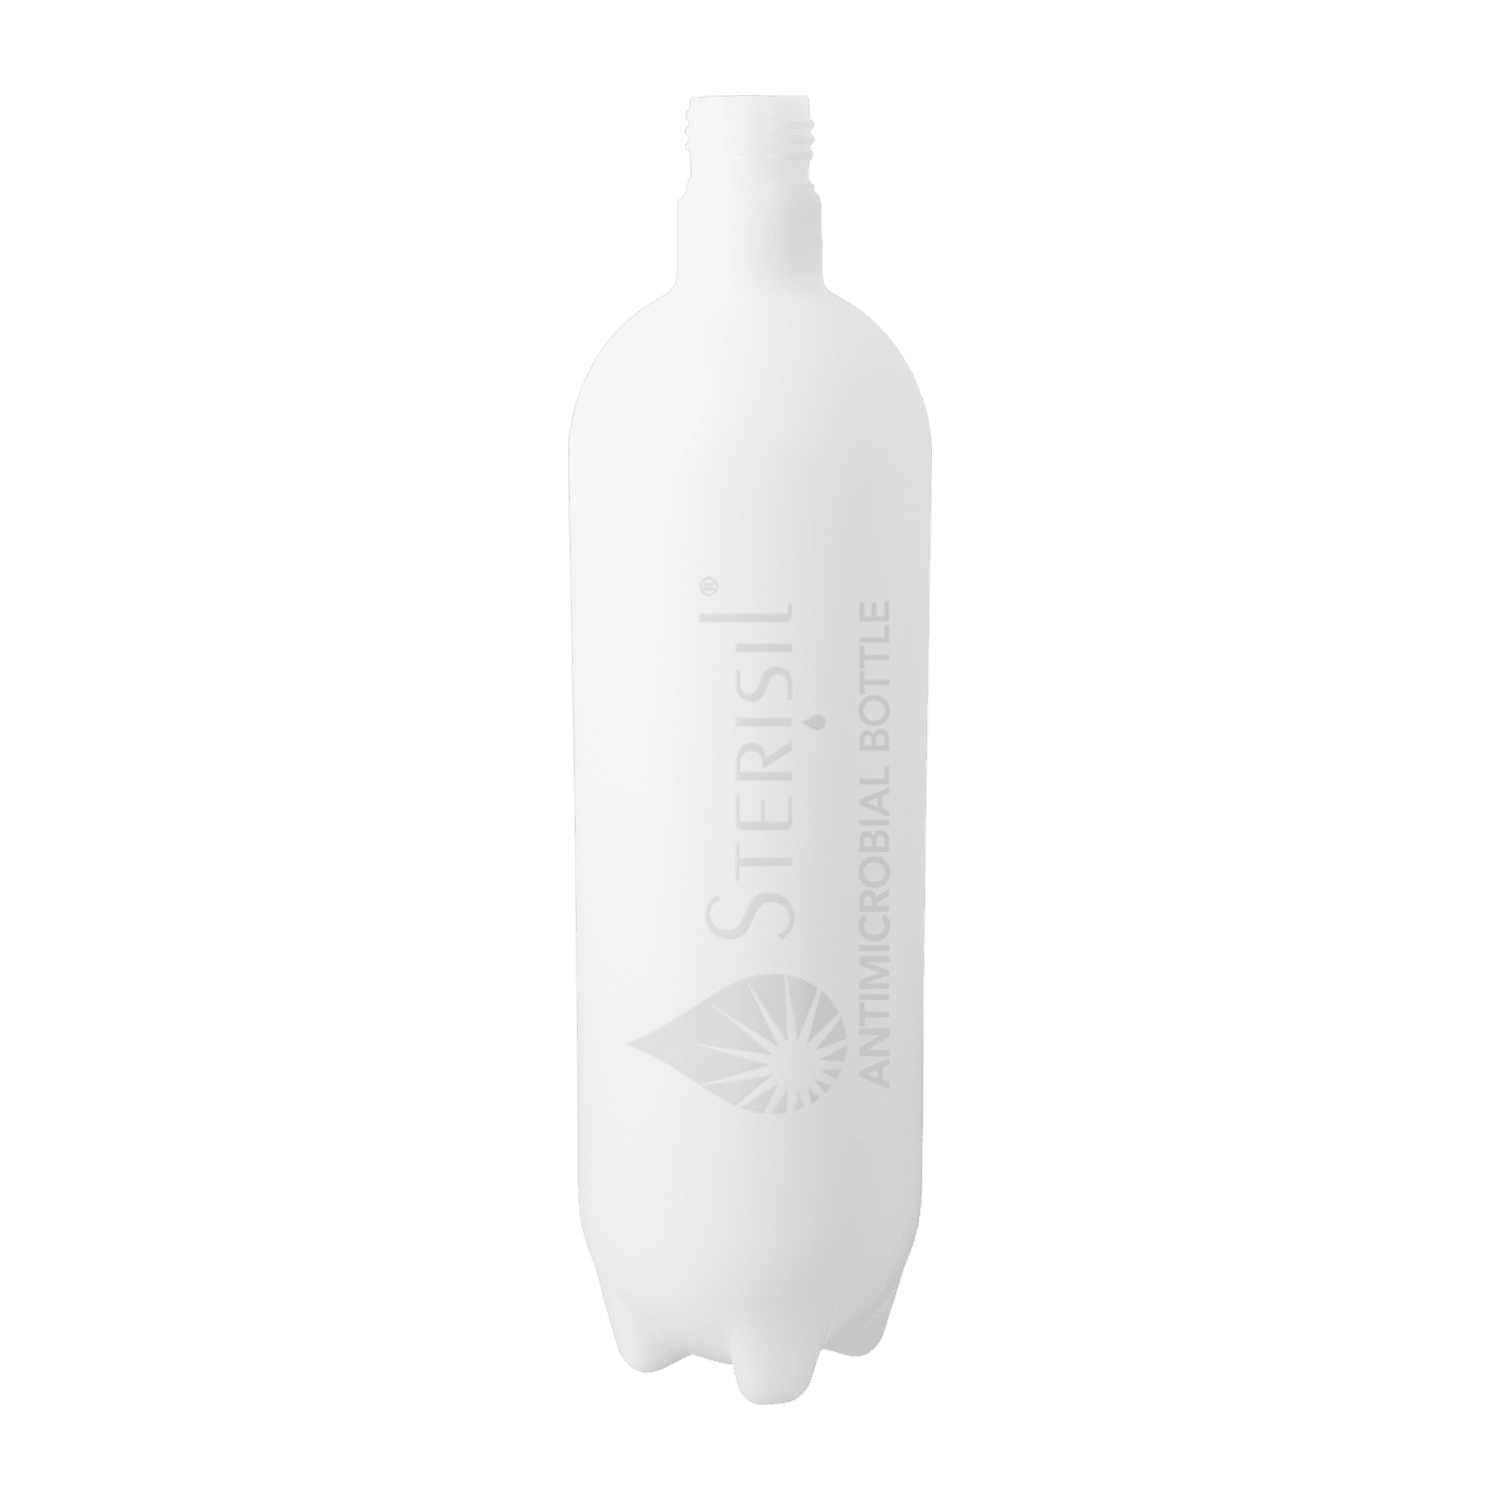 Sterisil Antimicrobial Bottle